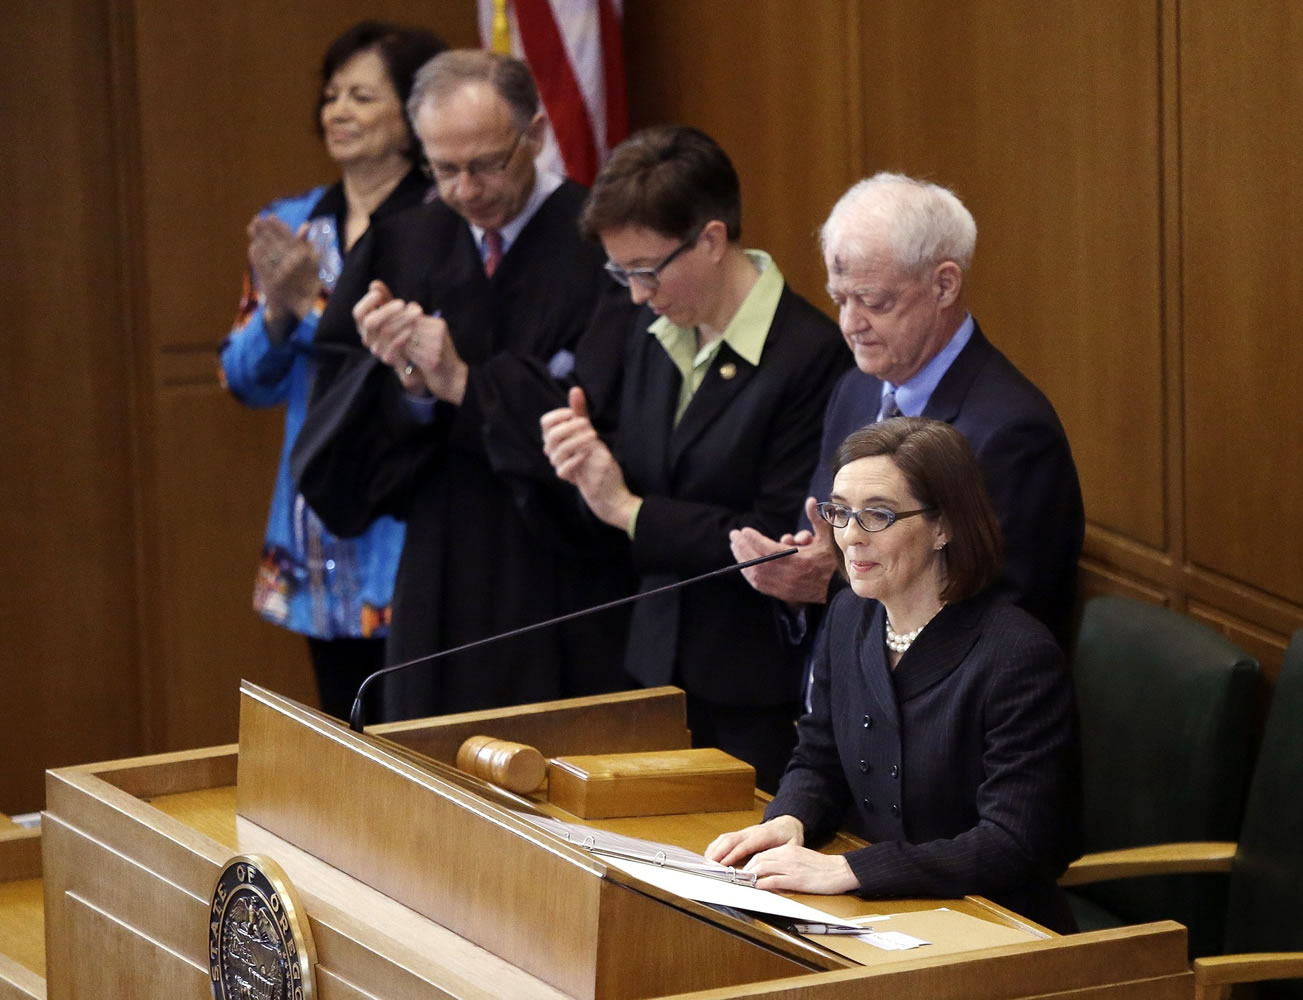 Oregon Gov. Kate Brown stands at the House podium after she is sworn in as Governor in Salem, Ore., Wednesday, Feb. 18, 2015. John Kitzhaber, elected to an unprecedented fourth term last year, announced last week that he would step down amid allegations his fiancee used her relationship with him to enrich herself.